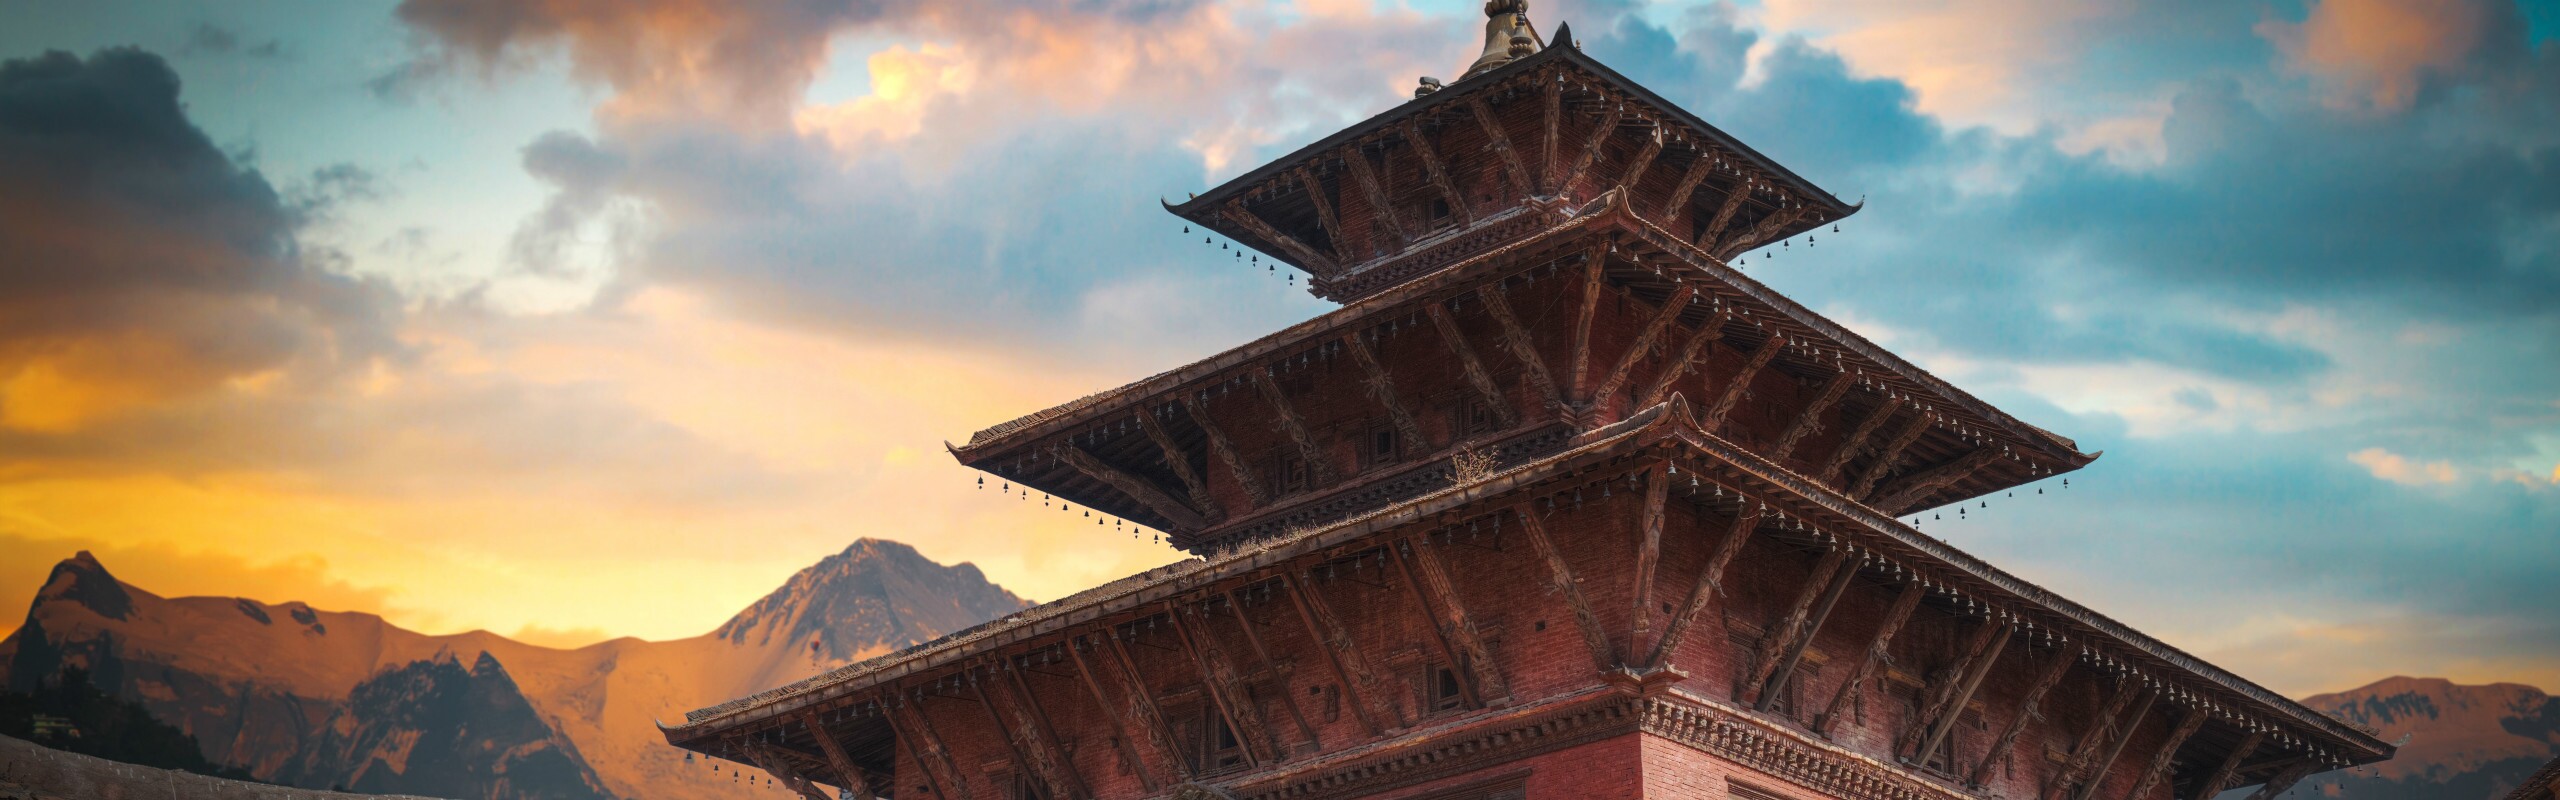 How to Plan a Trip to Nepal — A Complete Guide to Travel in Nepal